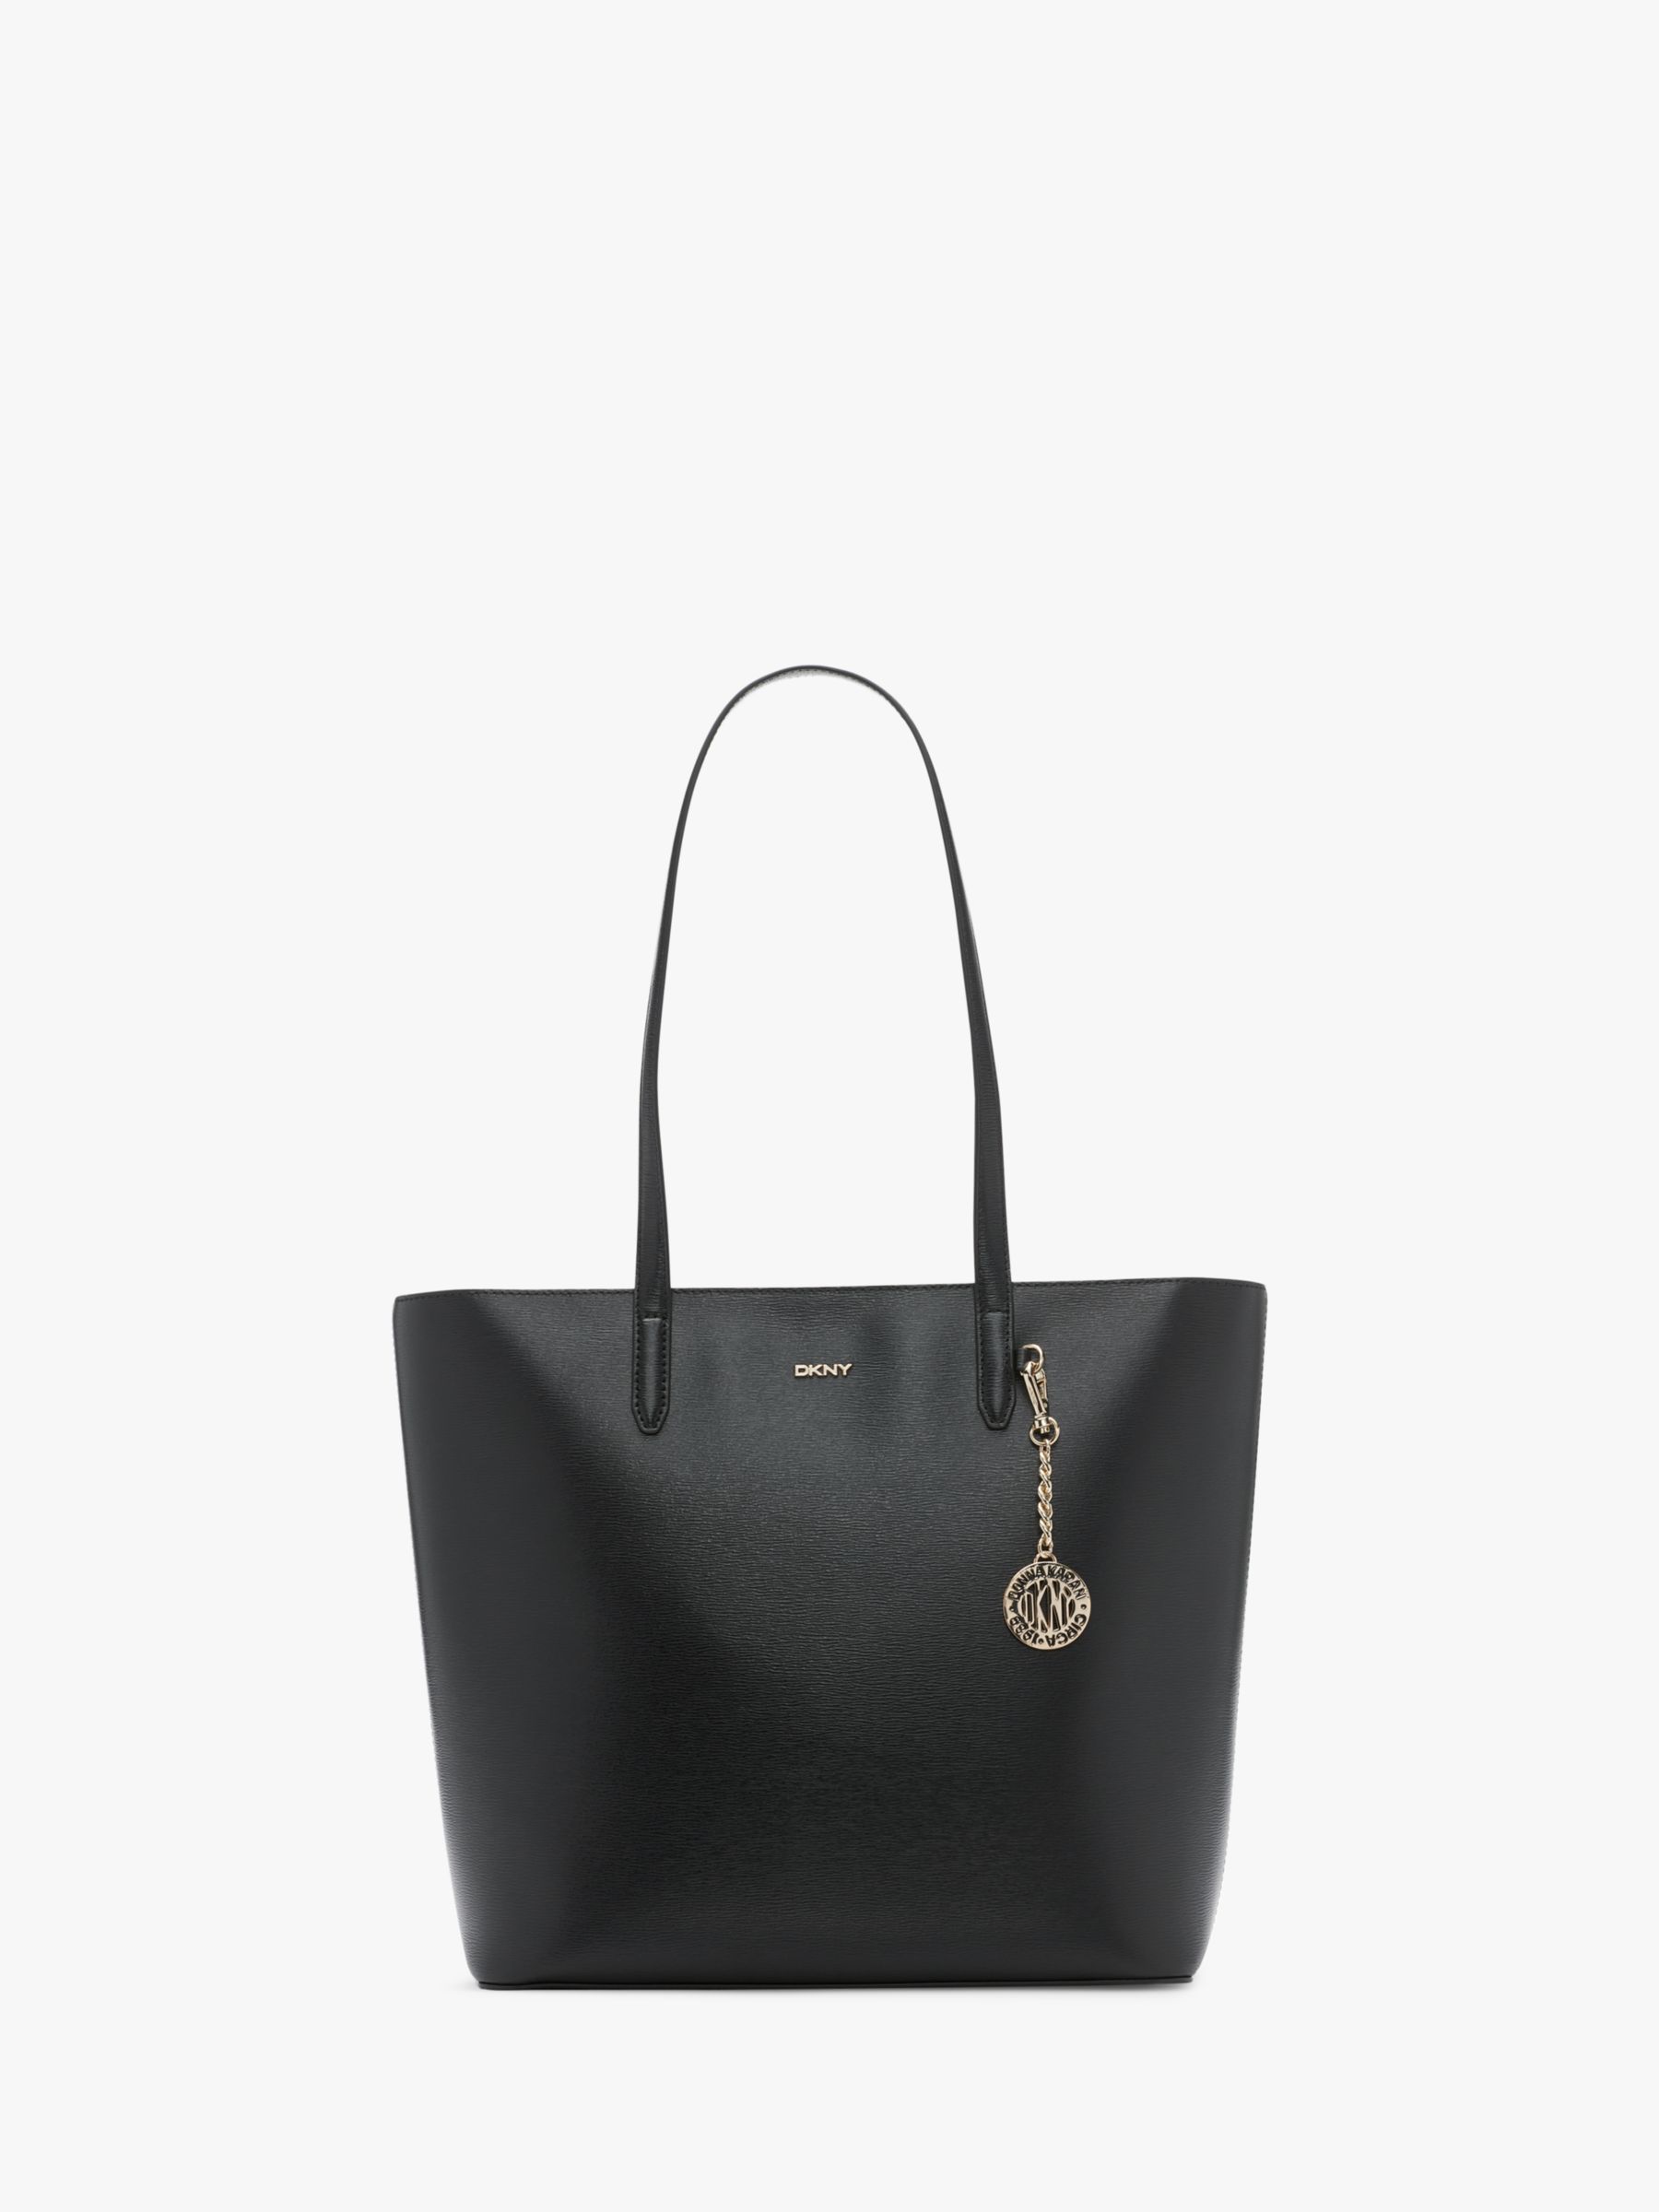 DKNY Bryant North South Leather Tote Bag, Black at John Lewis & Partners